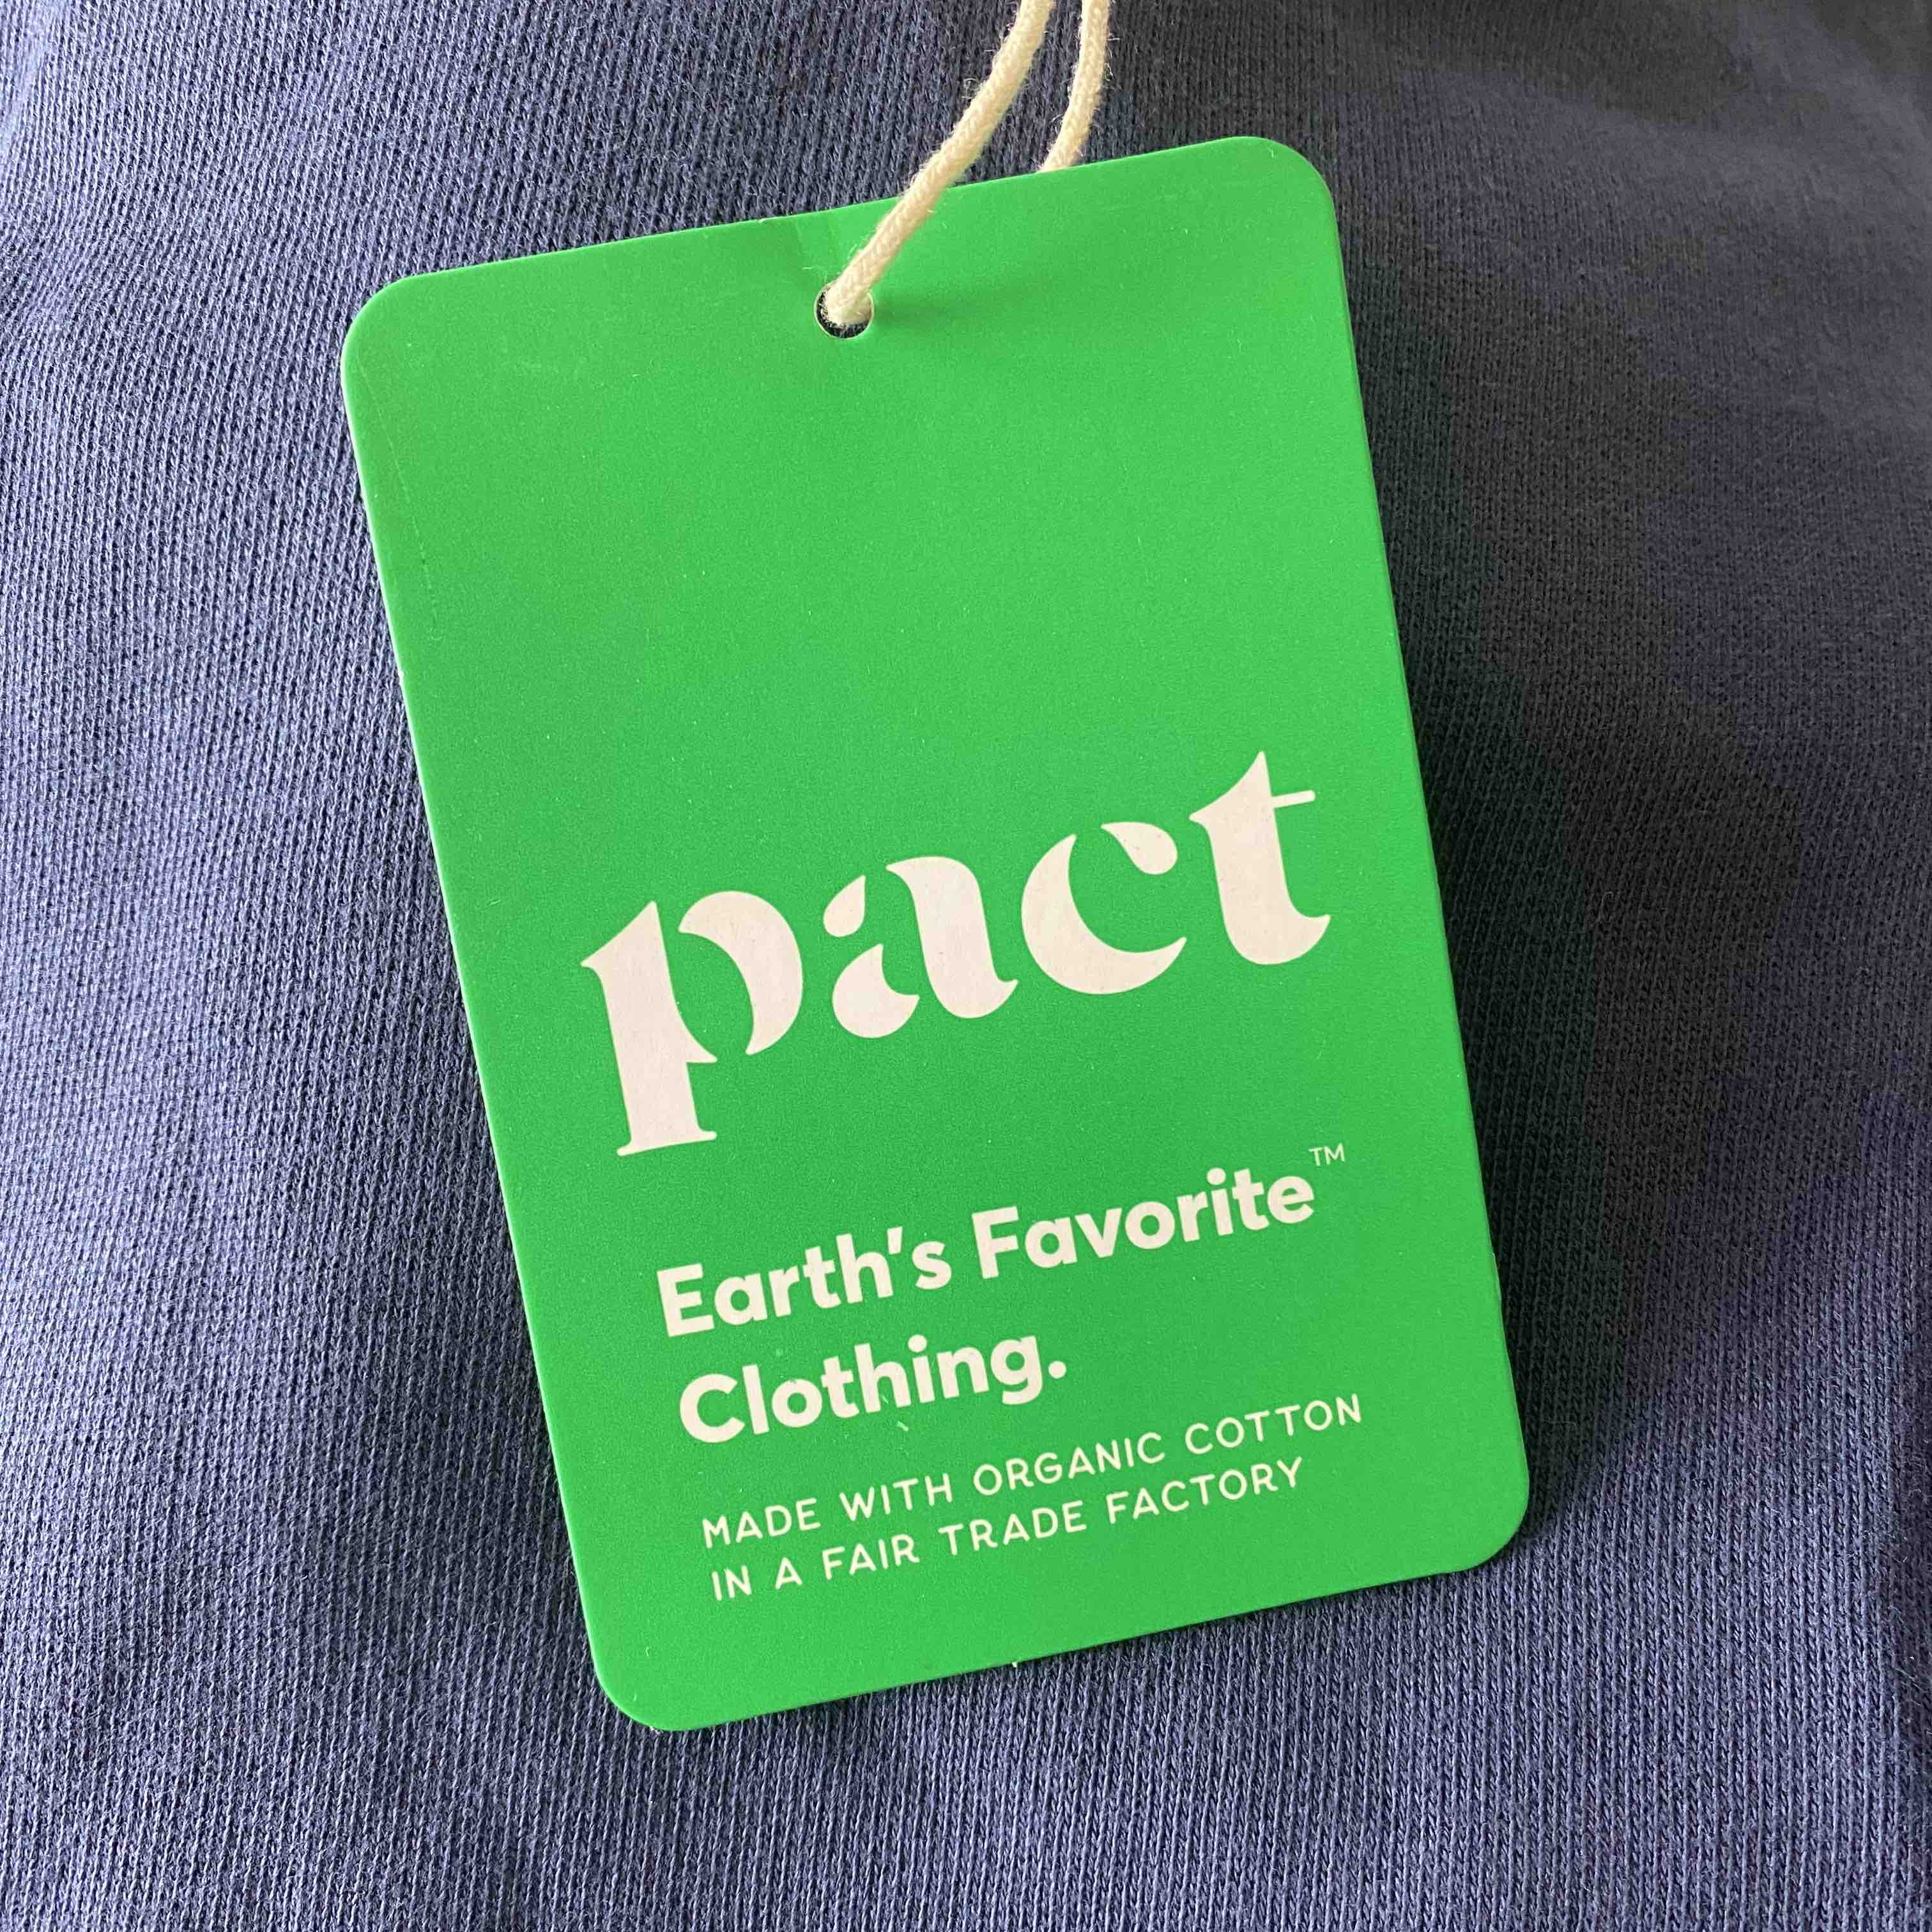 Sustainable Brands Similar To Pact For Ethical Men's Clothing